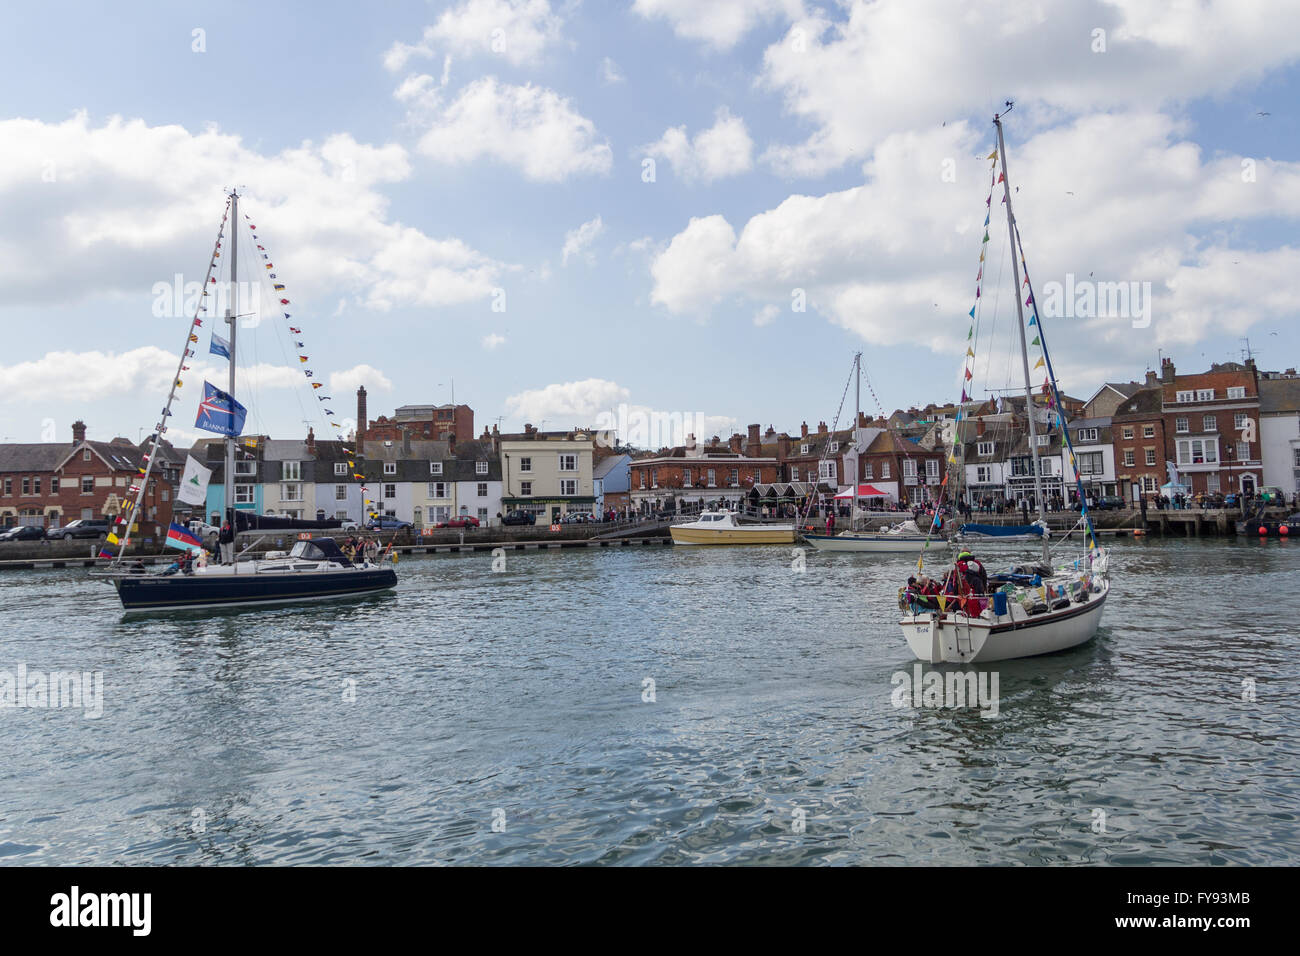 Weymouth, England. 23 April 2016. Queen's 90th Birthday Floating Tribute. Sailing boats with flags in harbour. Credit:  Frances Underwood/Alamy Live News Stock Photo